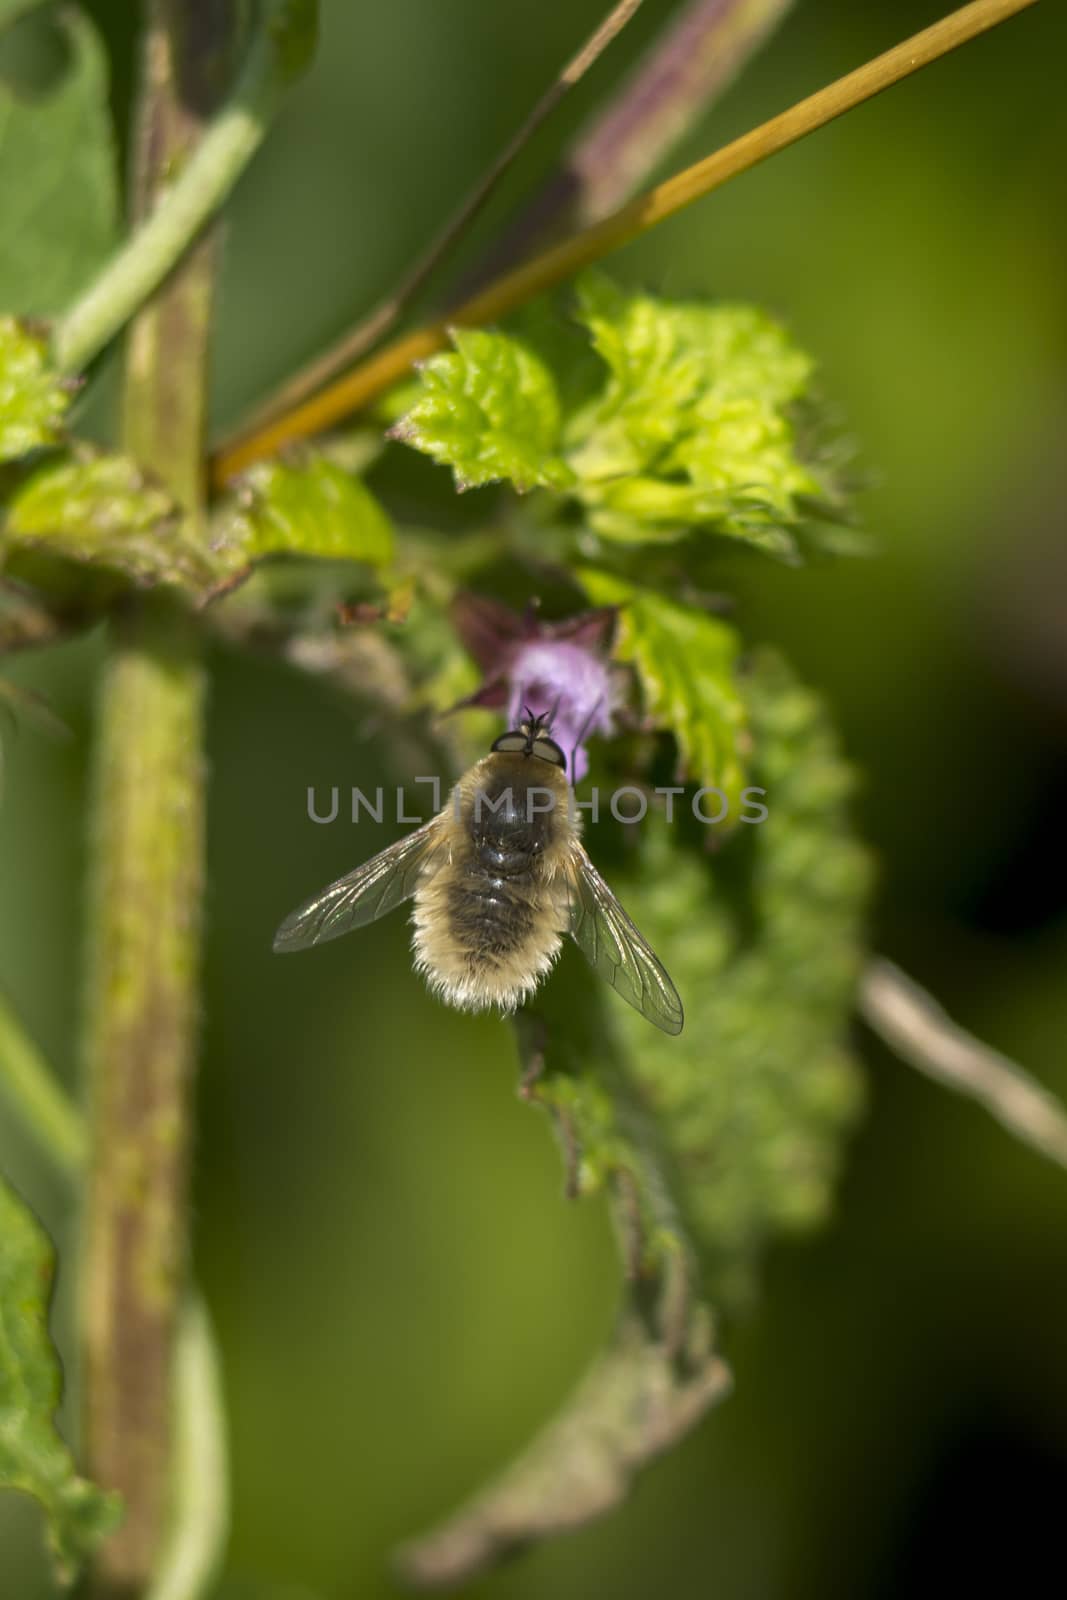 The Border fly  ( Bombylius major) rests on the leaf.